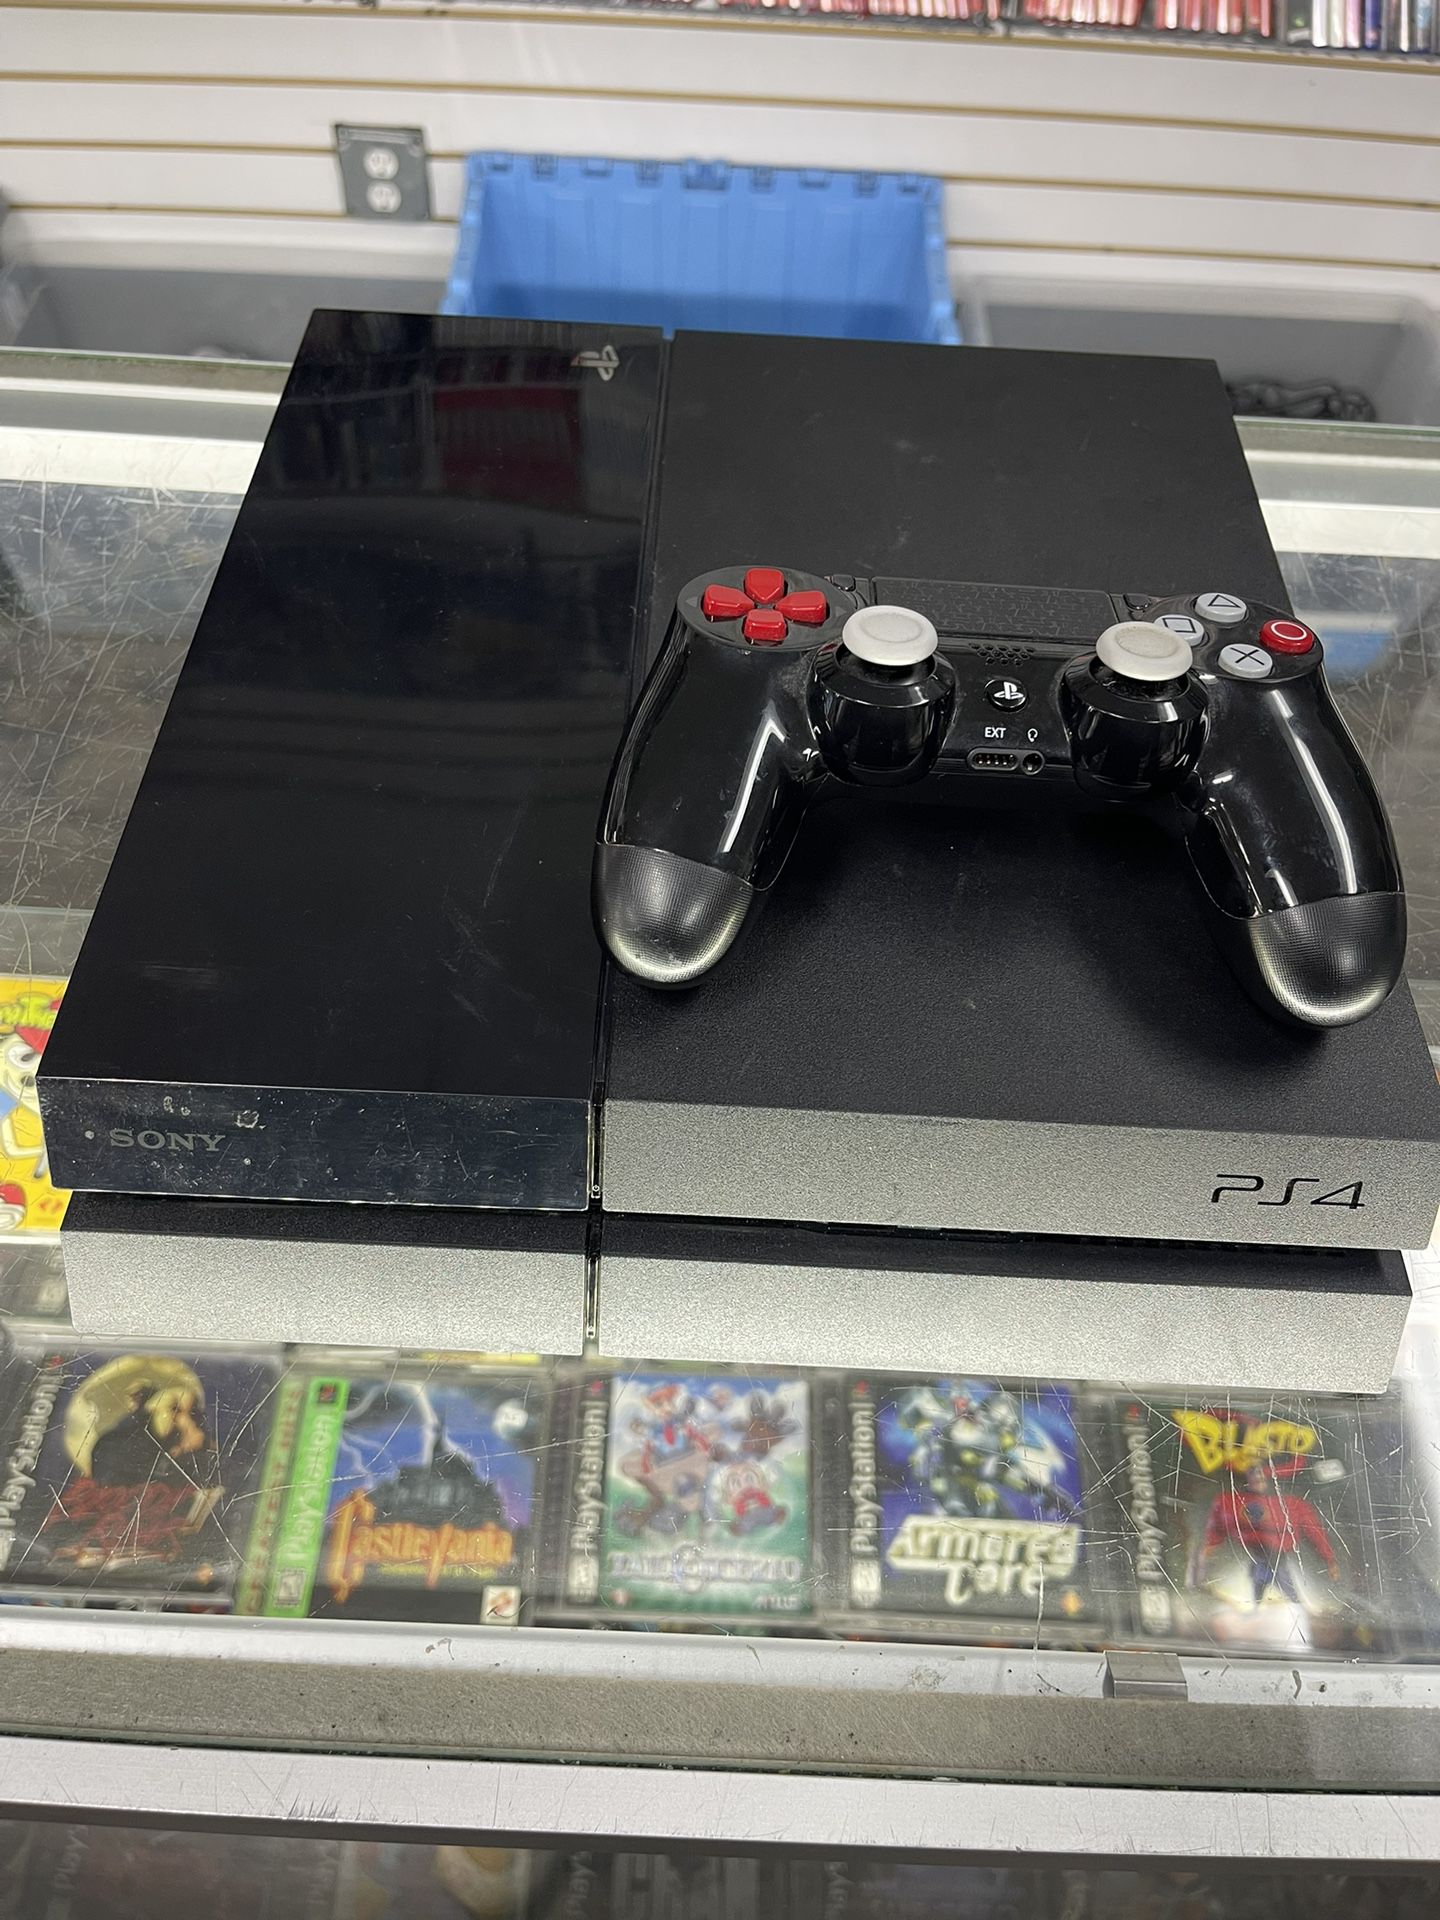 PlayStation 4 Complete $150 Gamehogs 11am-7pm